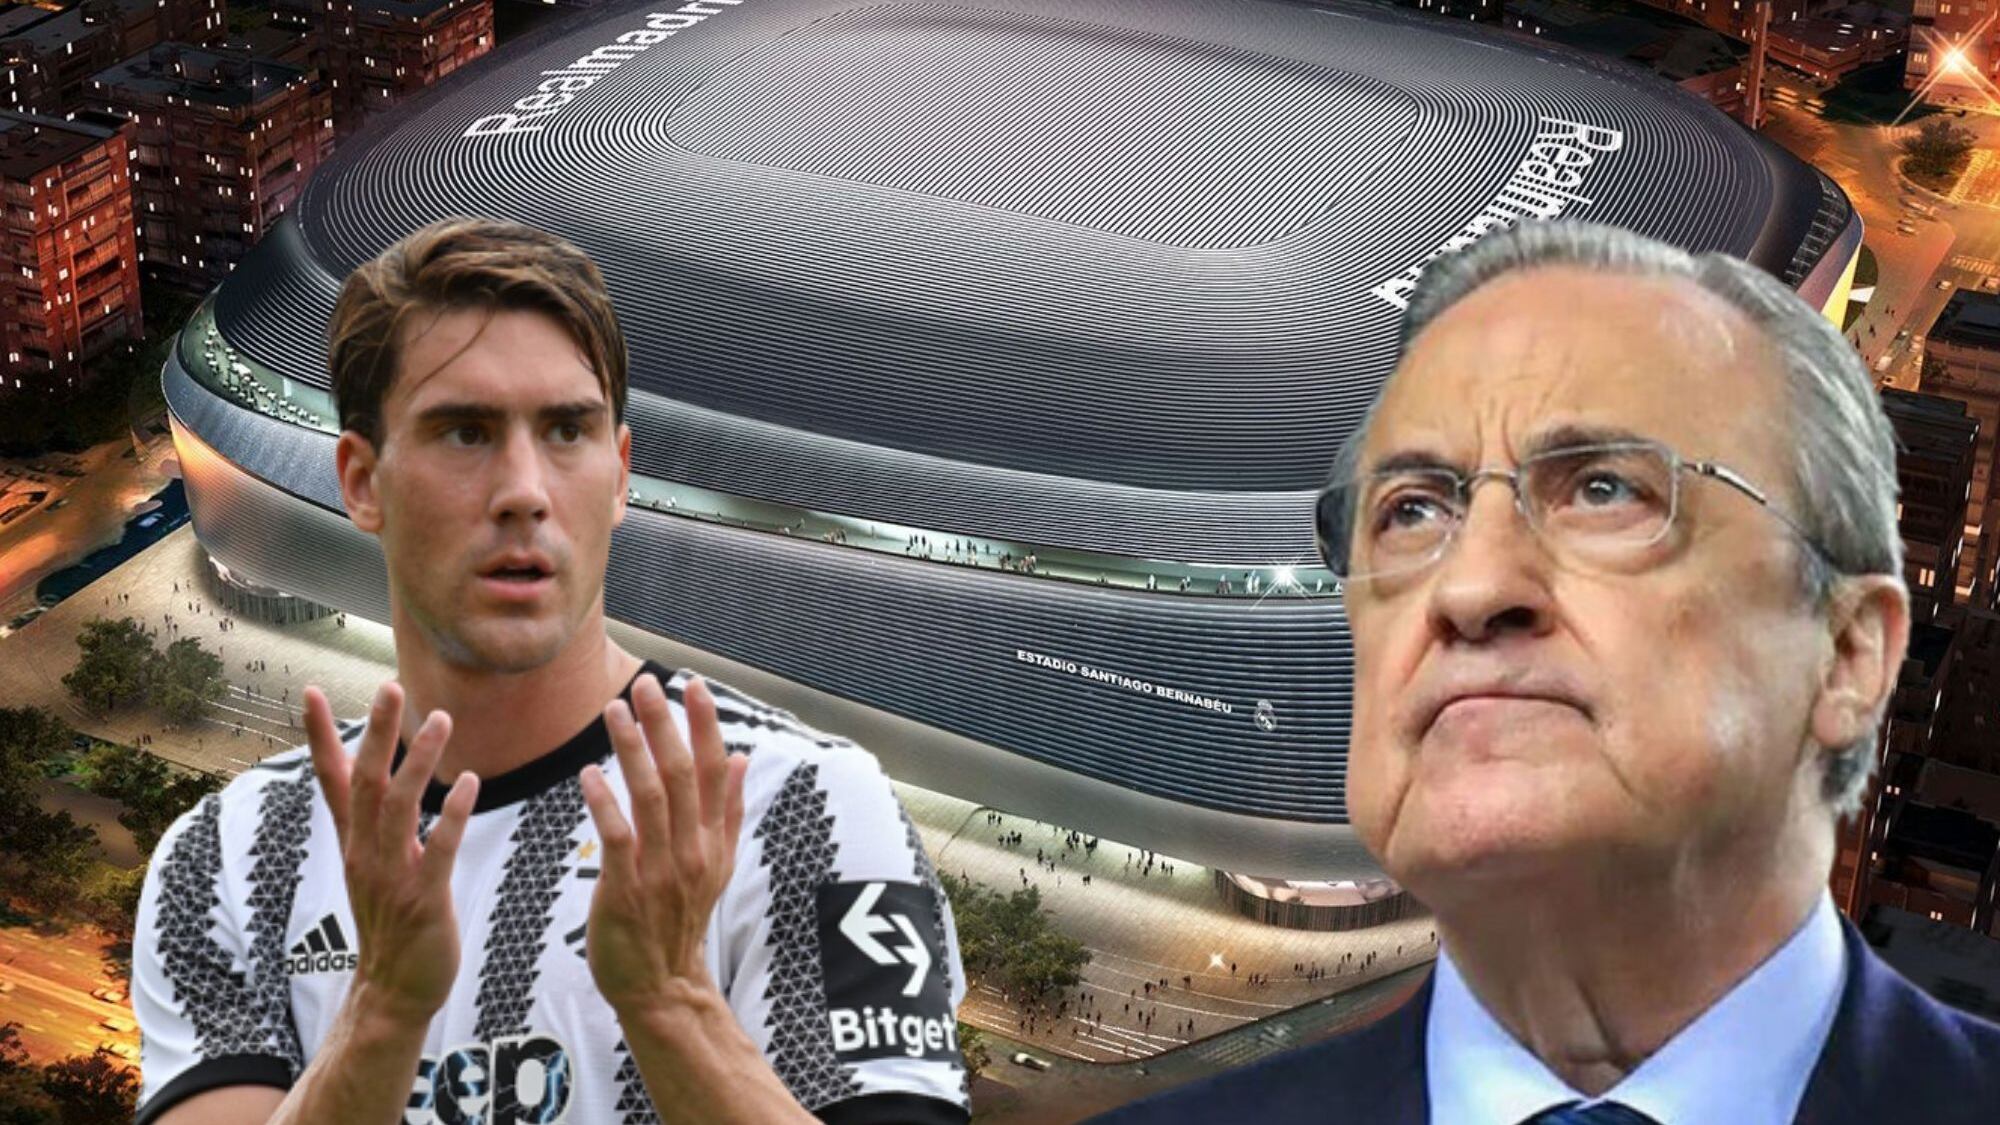 Welcome to Real Madrid Dusan Vlahovic, Florentino's decision that has surprised Europe